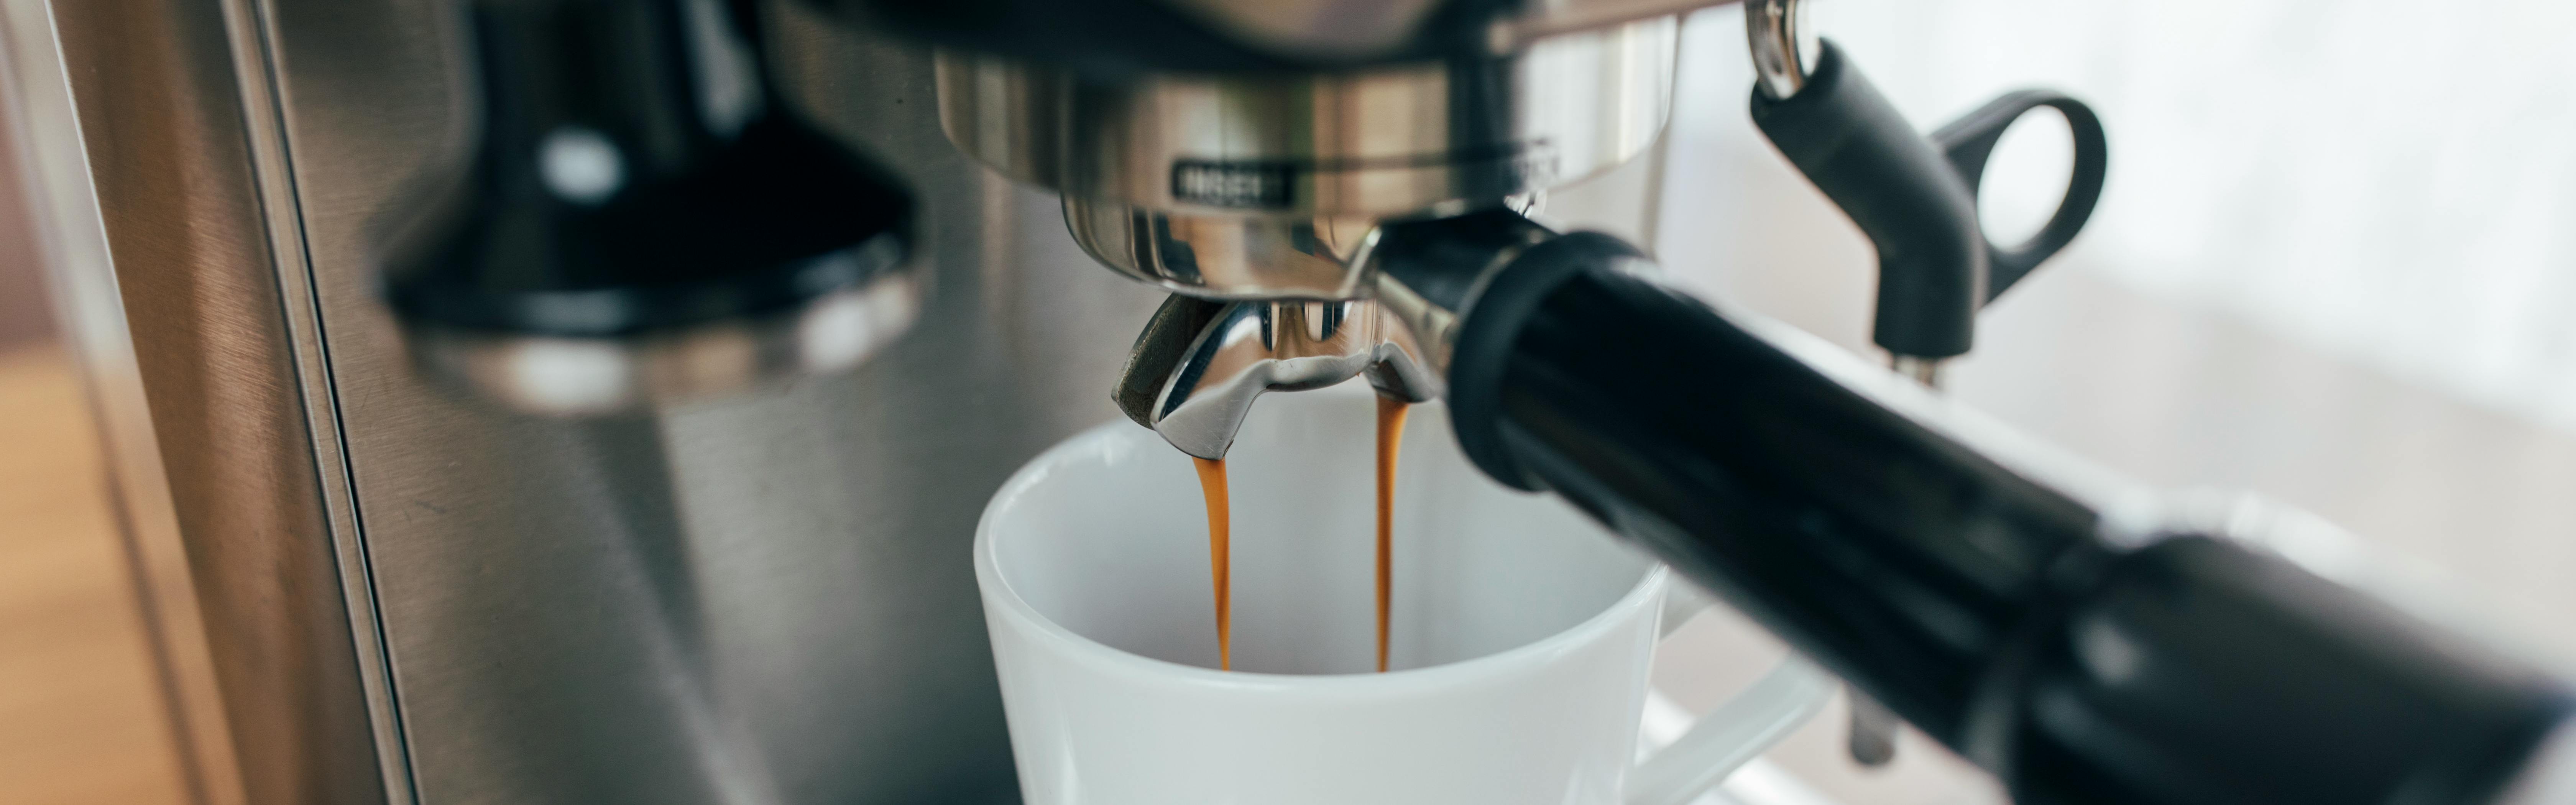 A cup of espresso being made with an espresso machine